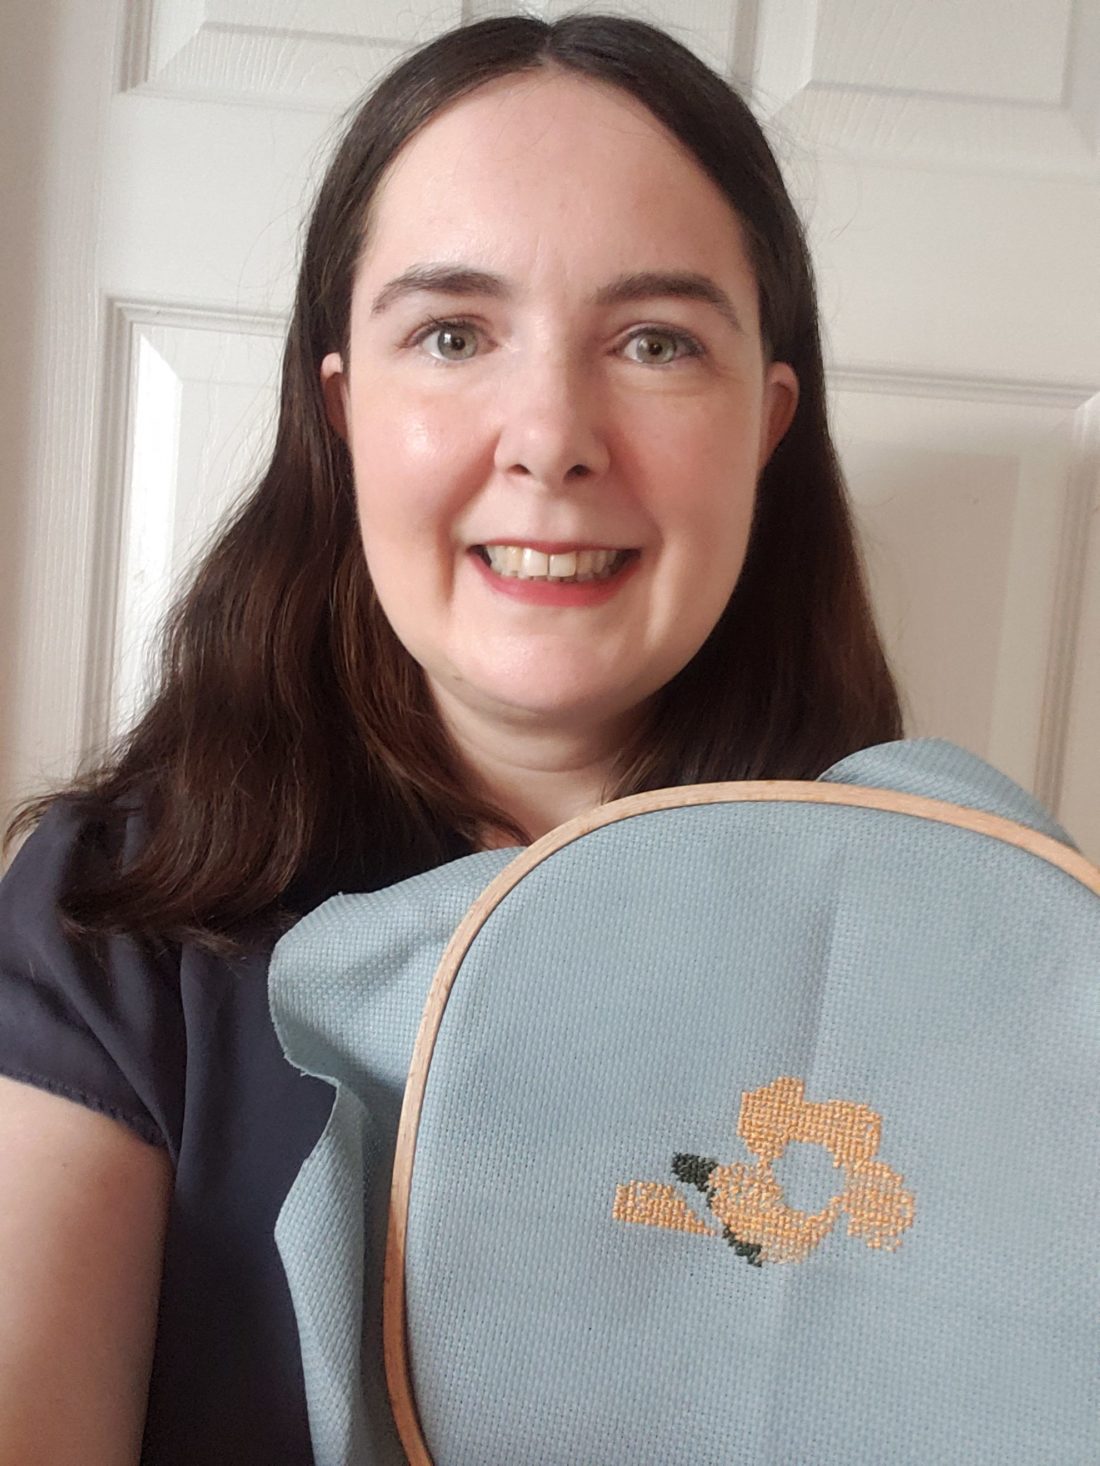 The Crafter’s Box ‘Cross Stitch’ Review – May 2021